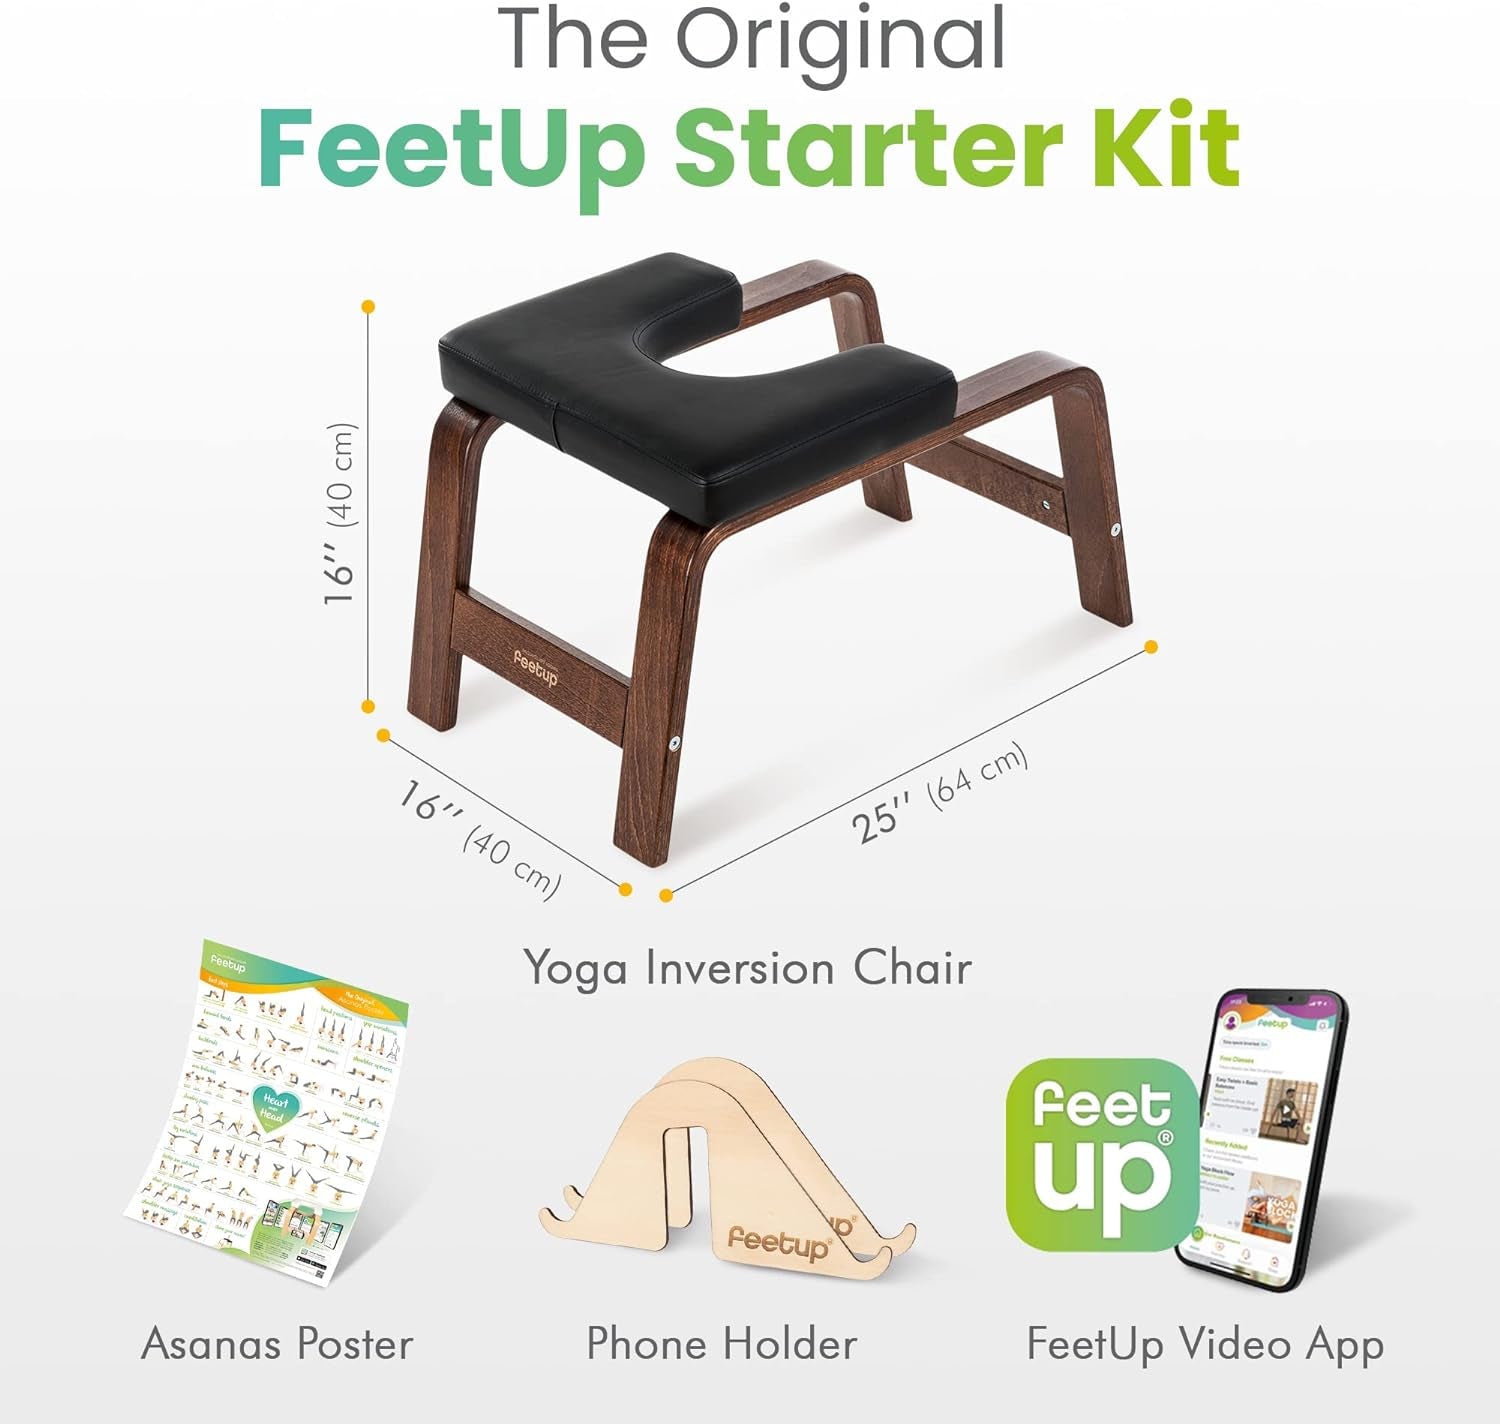 Yoga Headstand Bench, Vegan Handstand Trainer Bench and Stand, Strength Training Inversion Equipment for Relaxation and Strength, Includes App & Starter Kit, 1 Worldwide